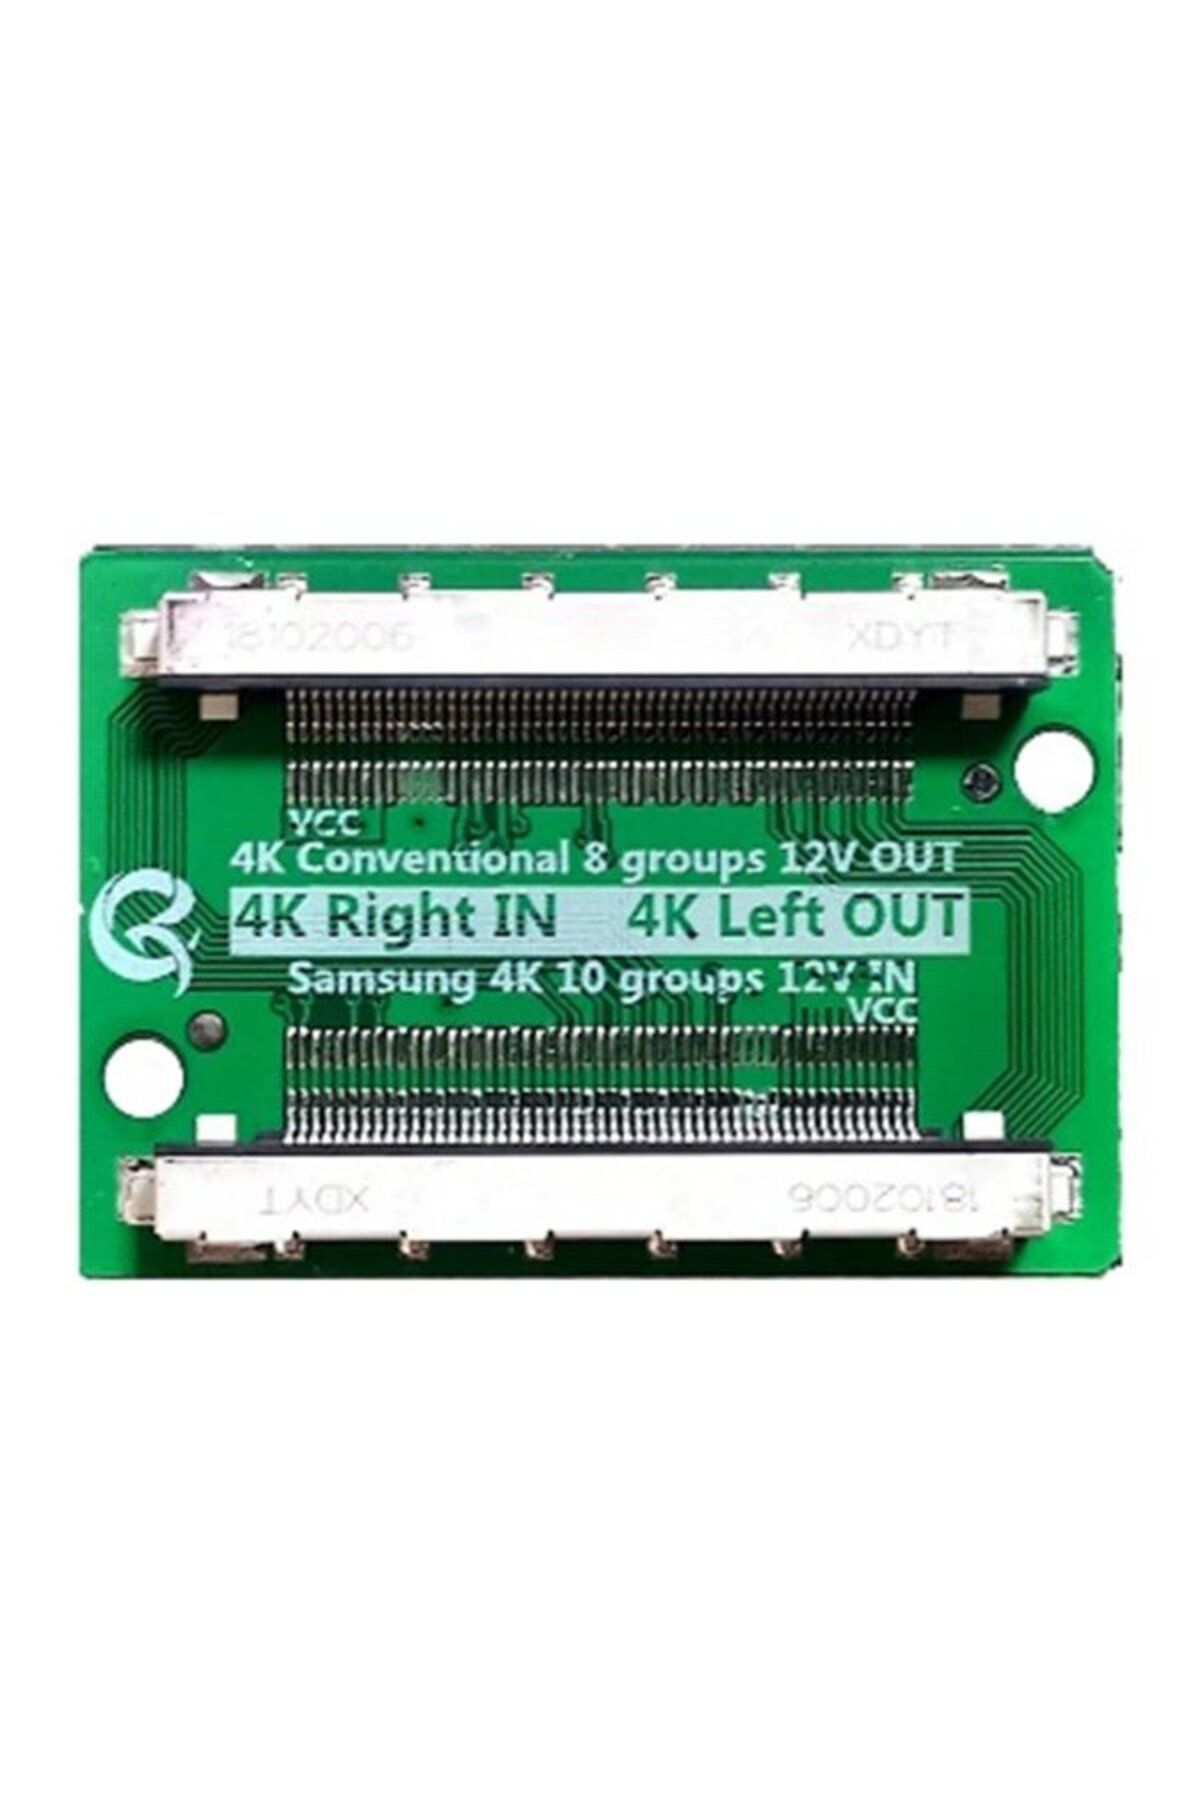 OEM LCD PANEL FLEXİ REPAİR KART 4K RİGHT İN 4K LEFT OUT LVDS TO LVDS QK0822A